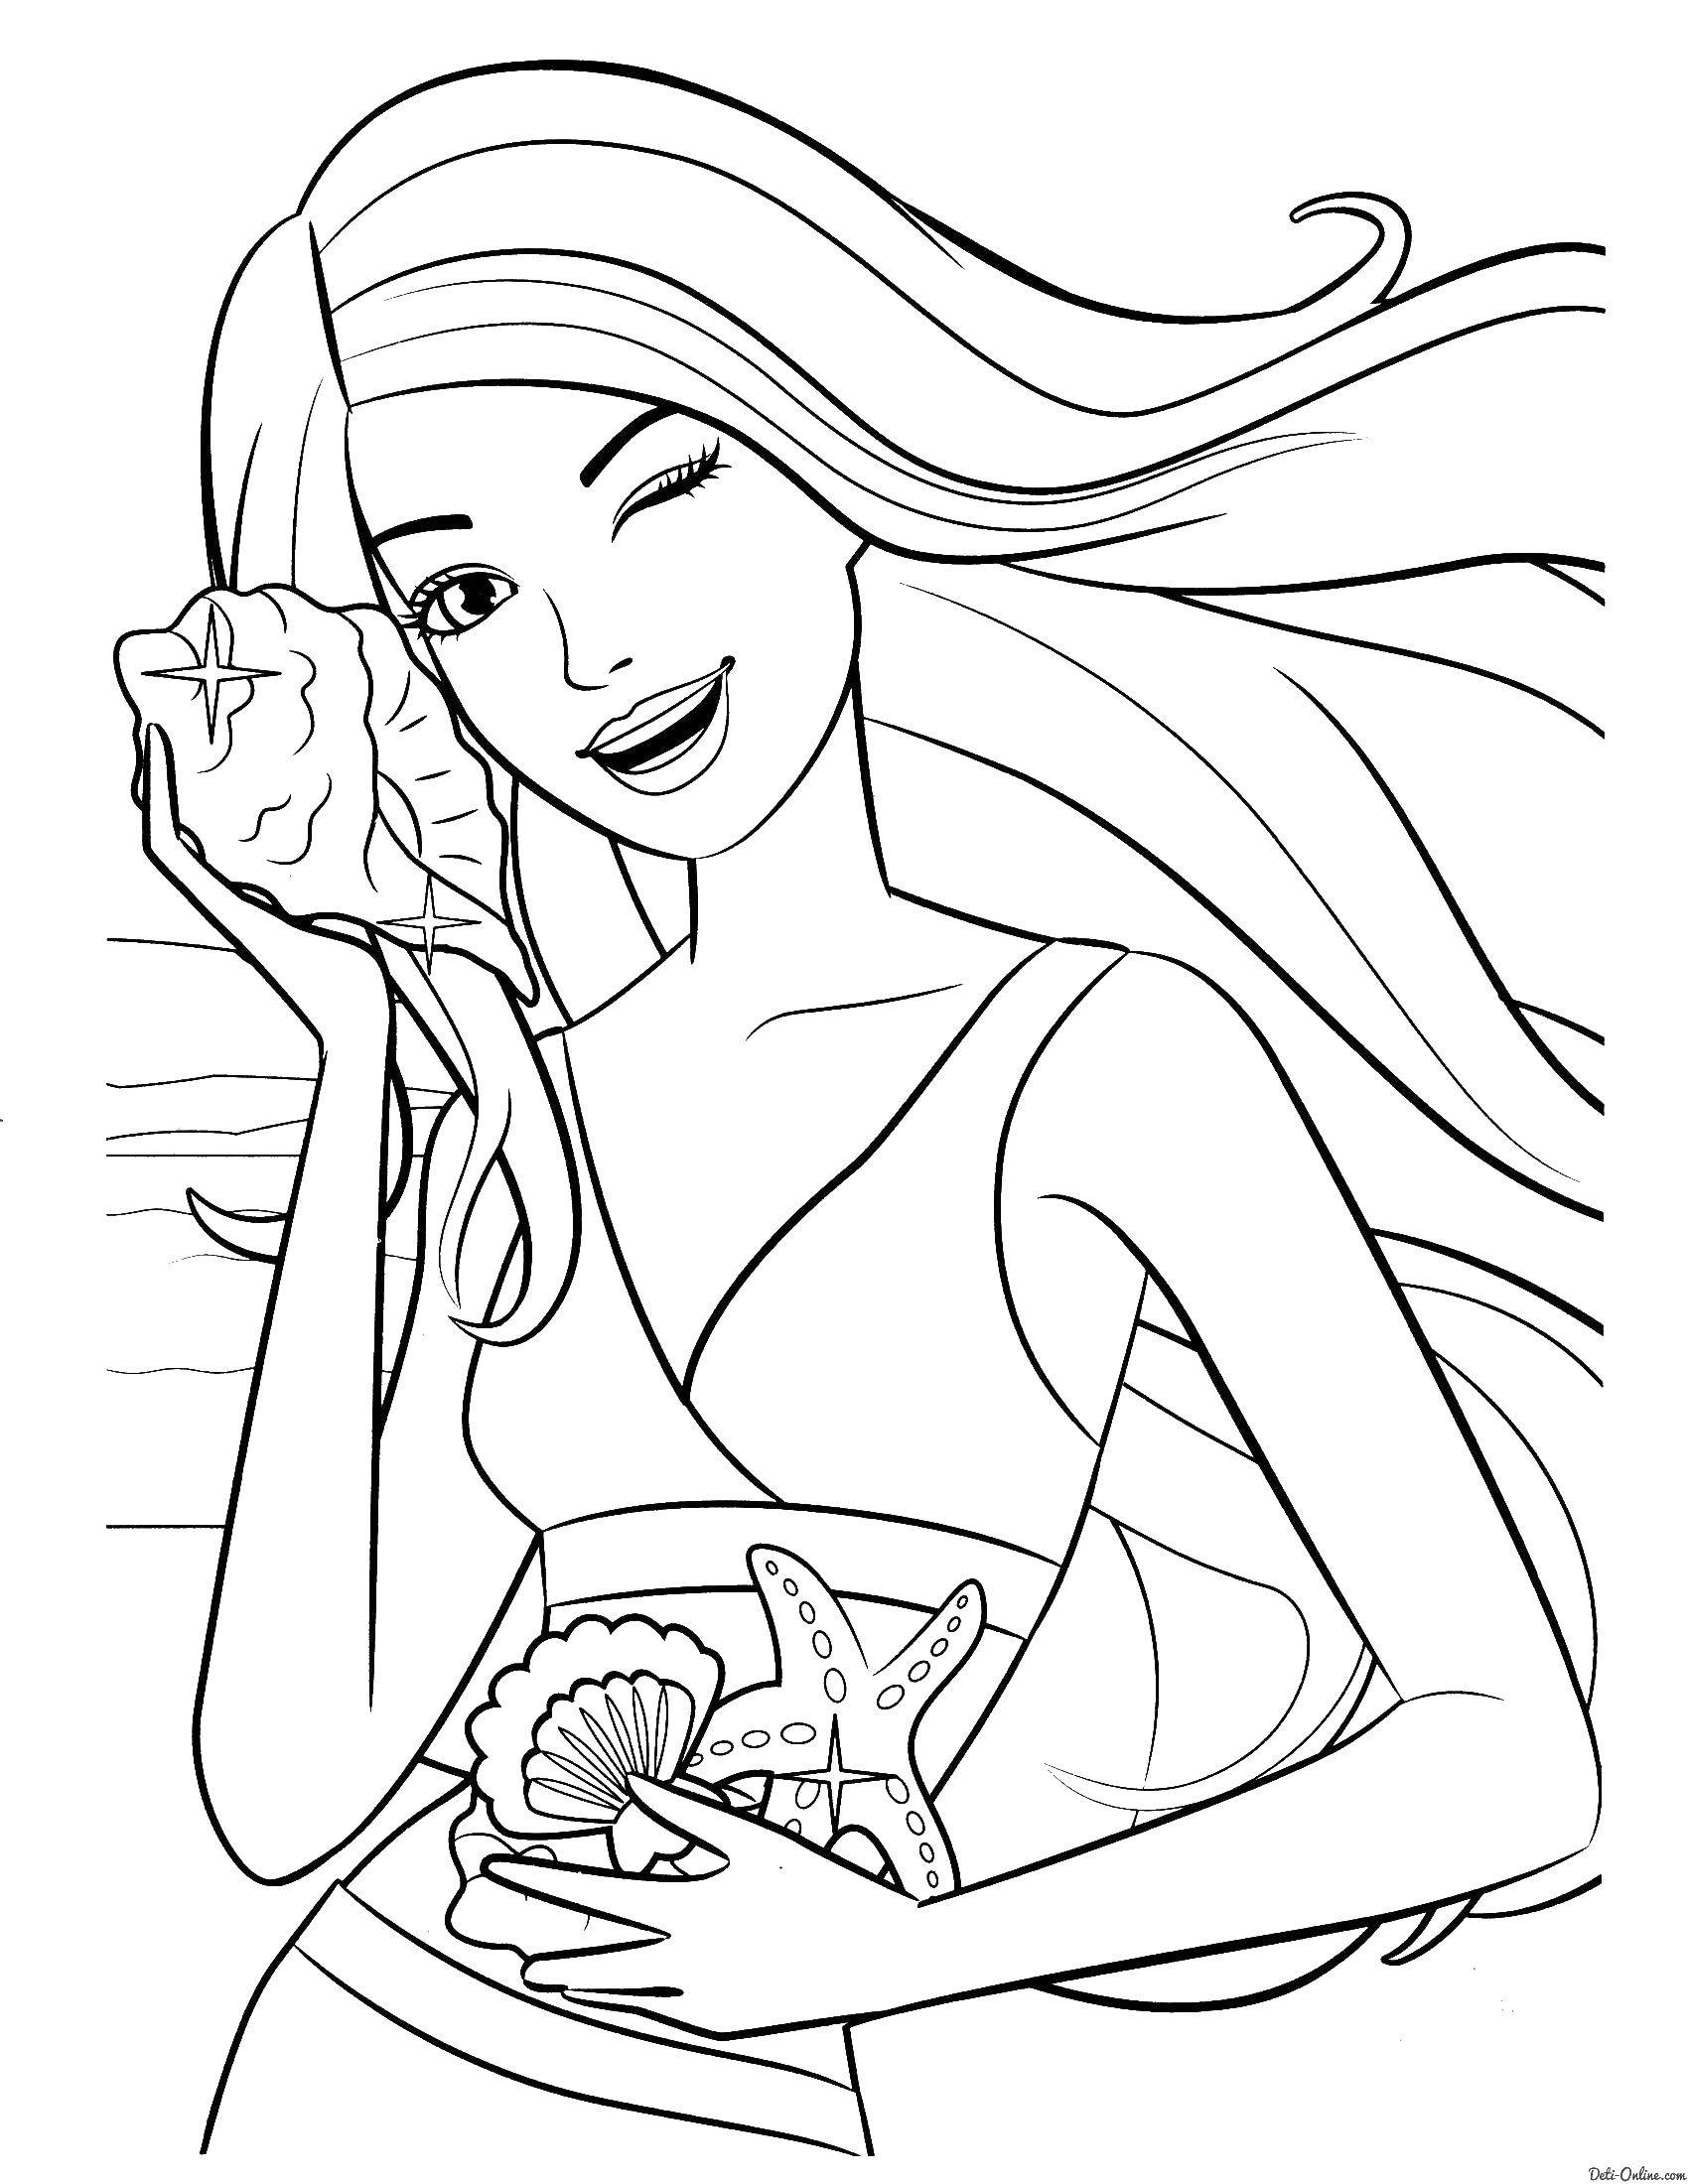 Coloring Barbie with shells. Category Barbie . Tags:  Barbie , shell.